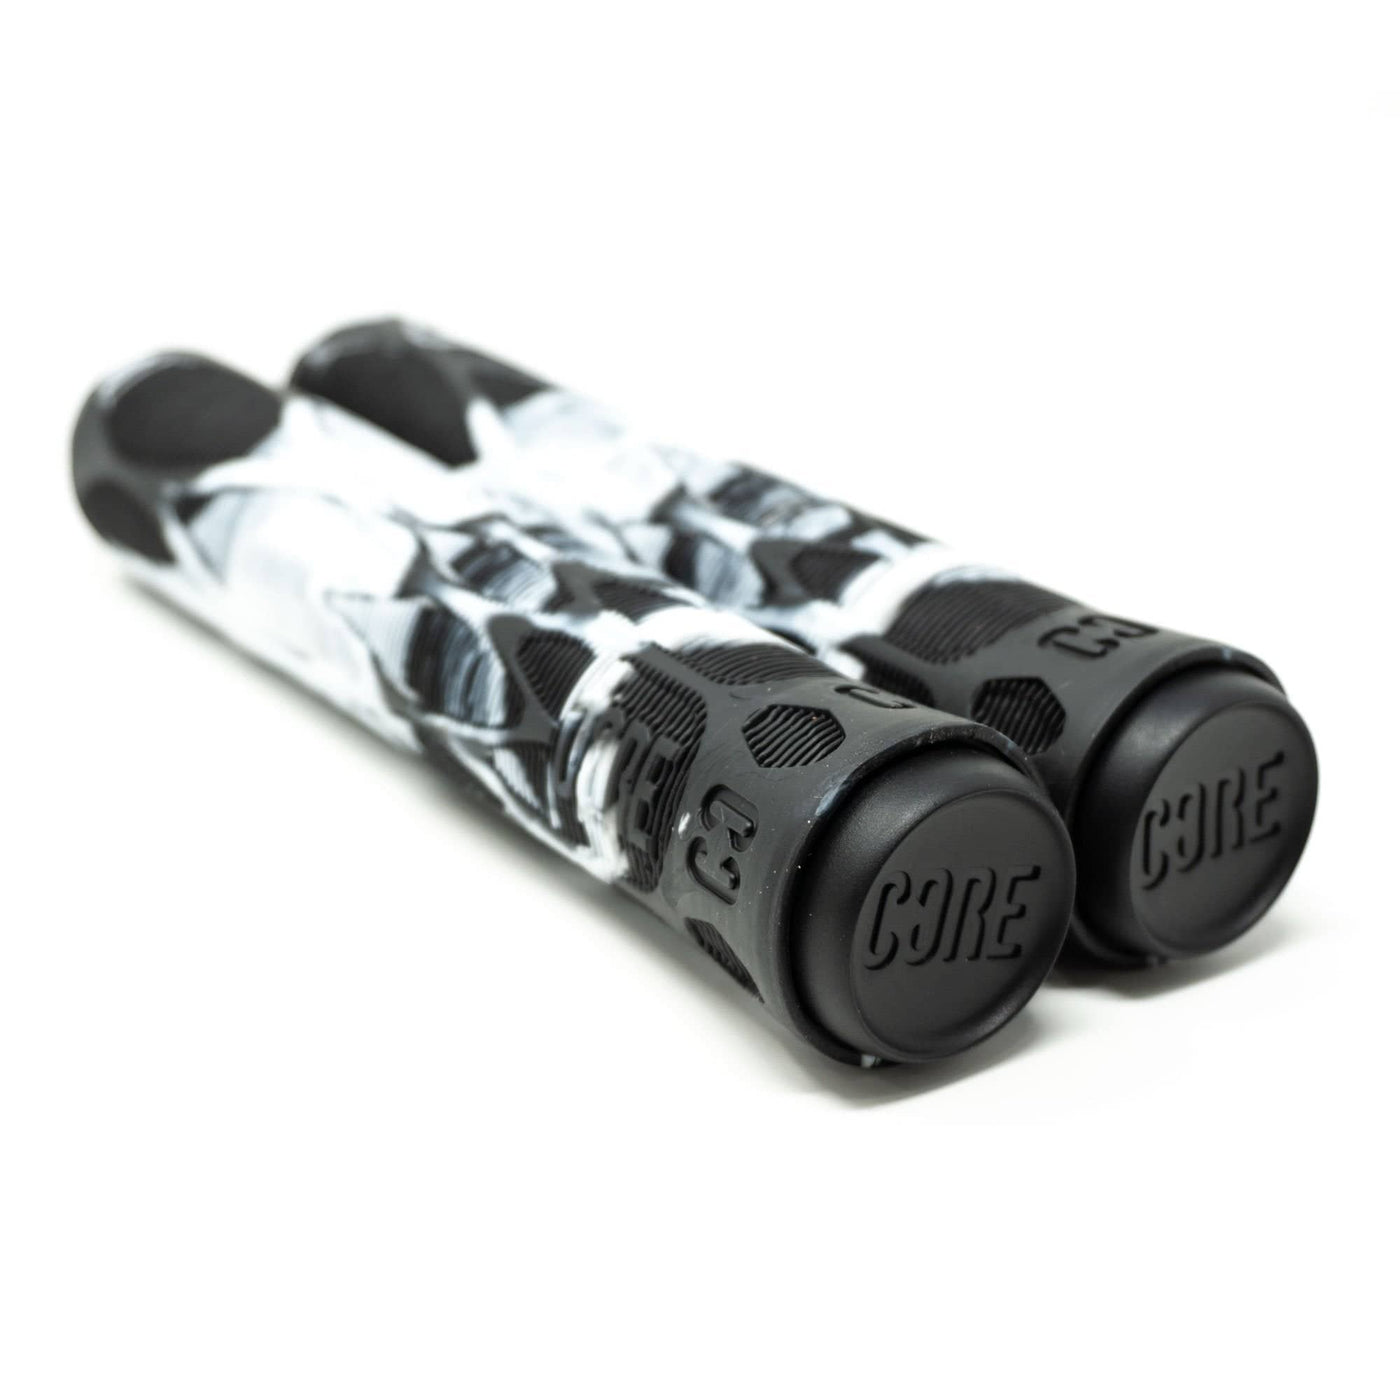 CORE Pro Scooter Handlebar Grips Soft 170mm Slate White/Black I Scooter Grips Laying Down